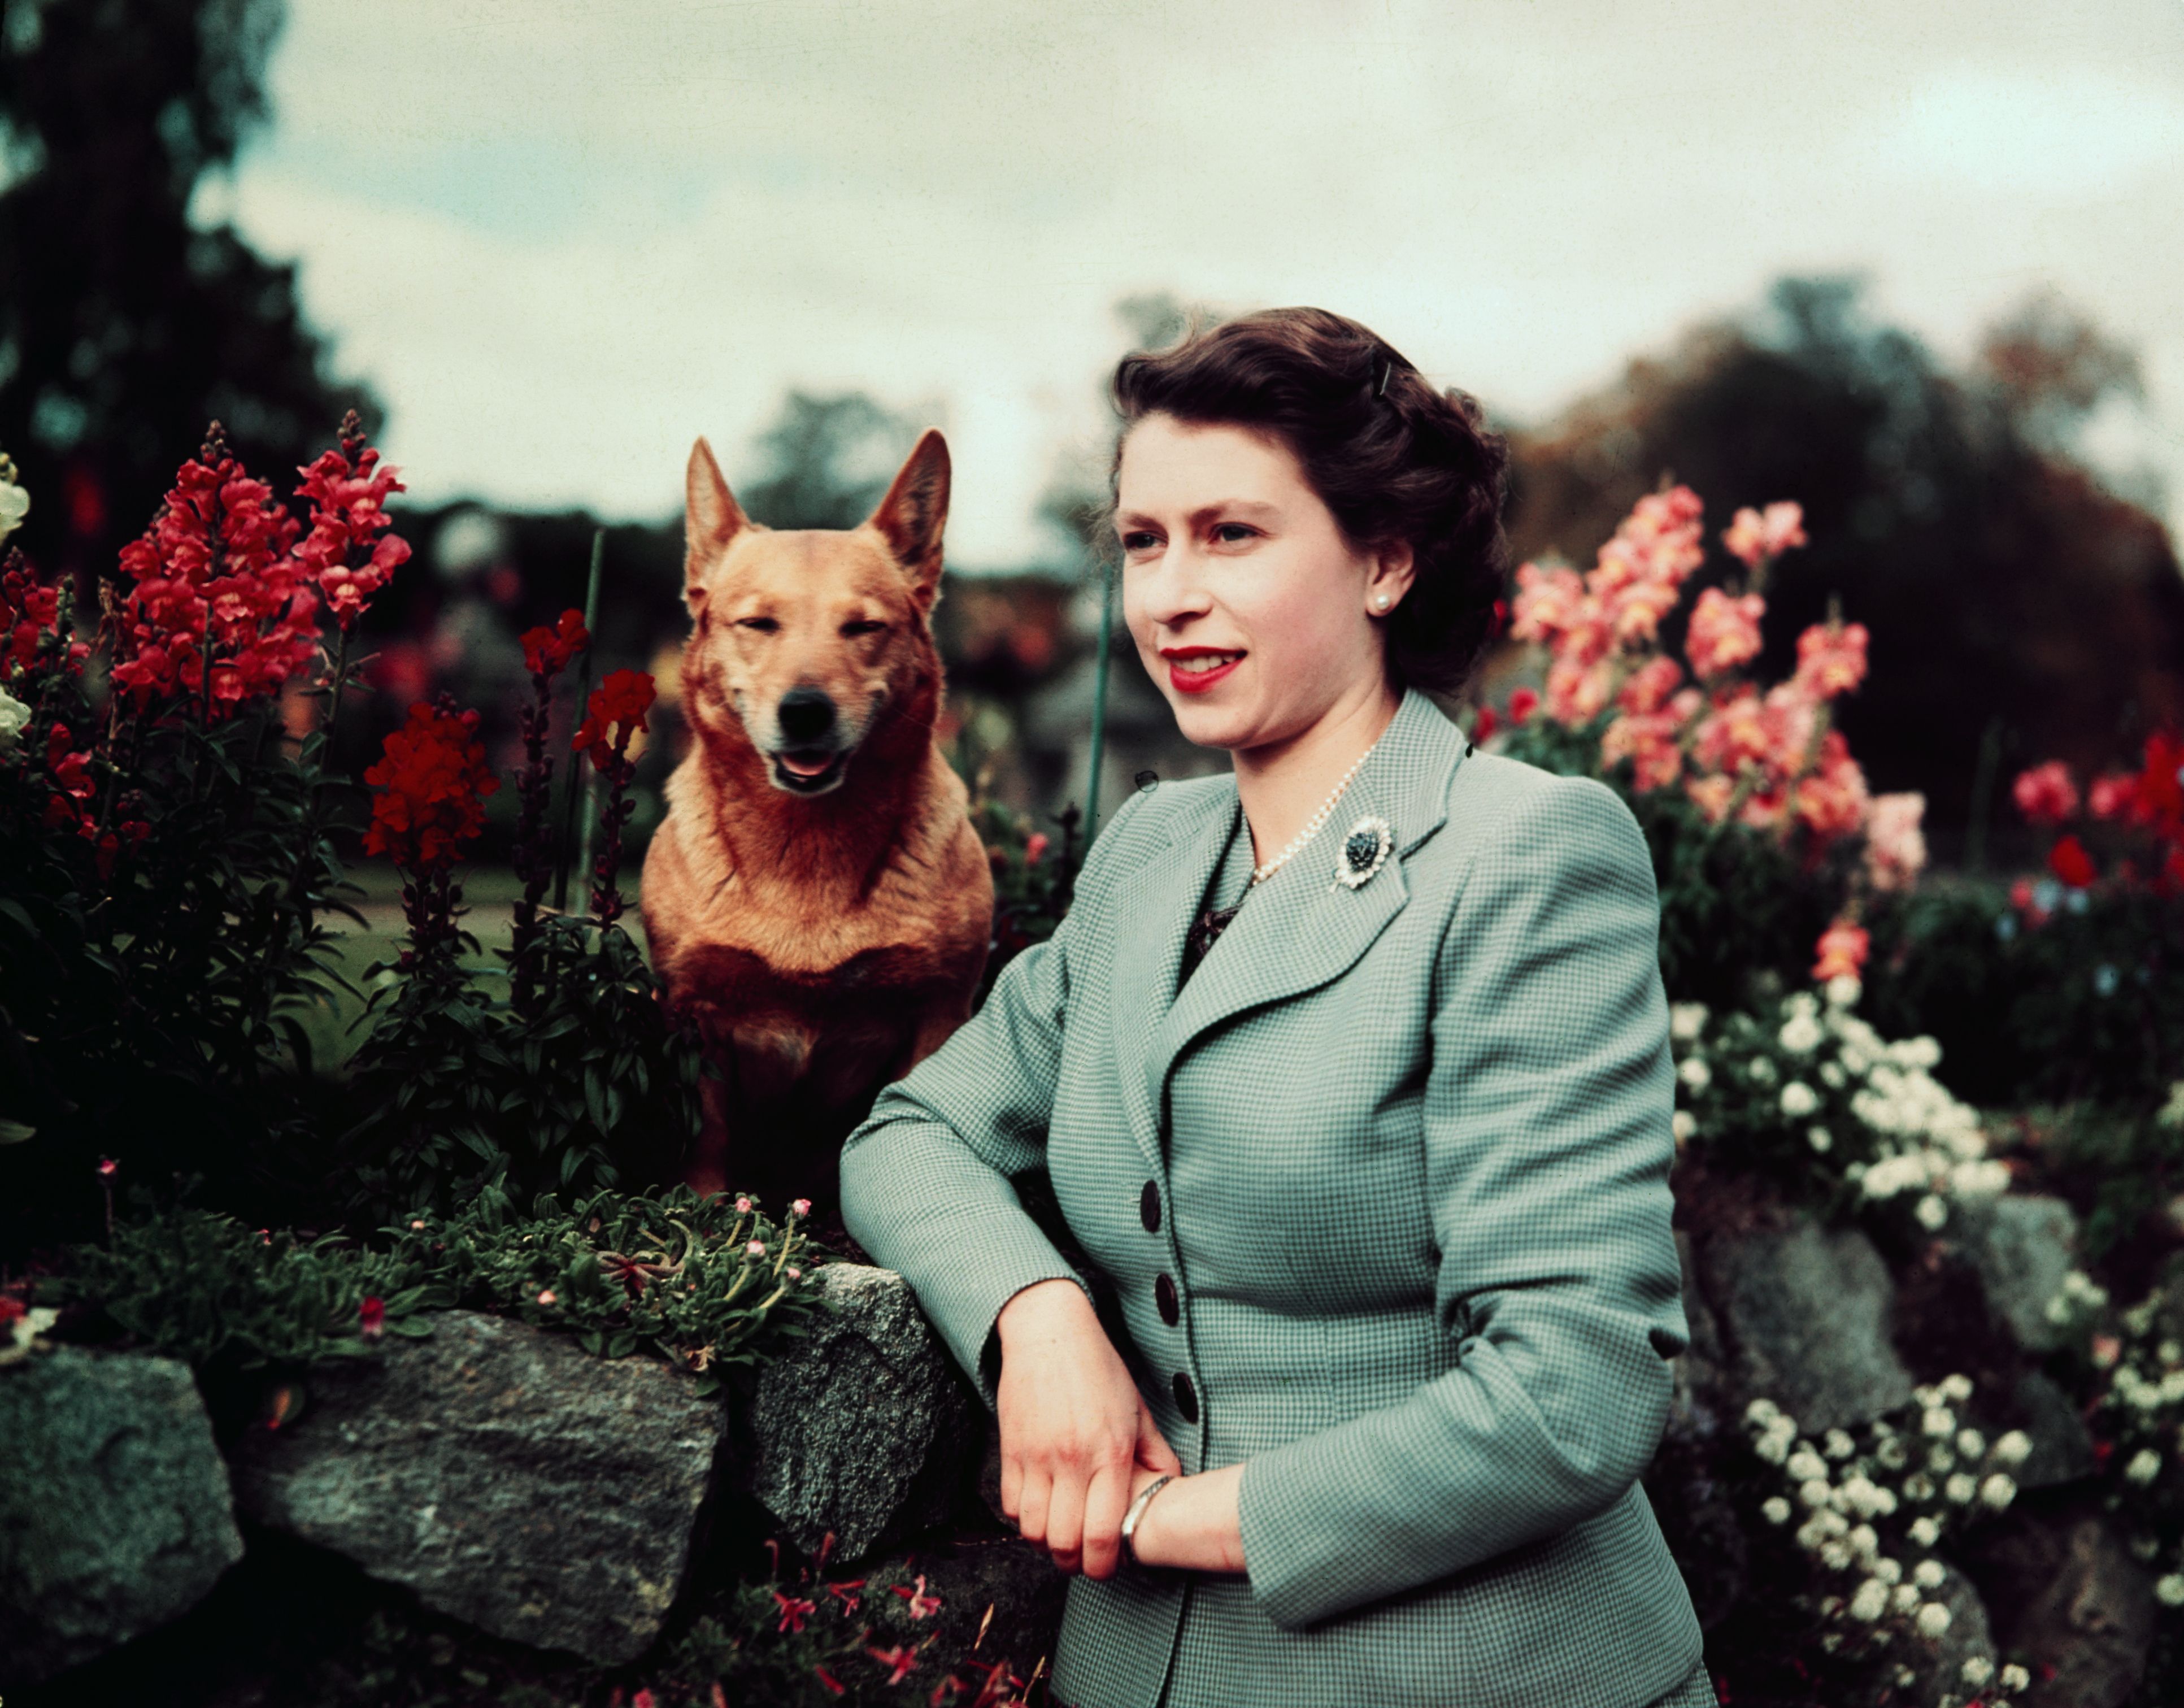 favorite dog breed of queen of england